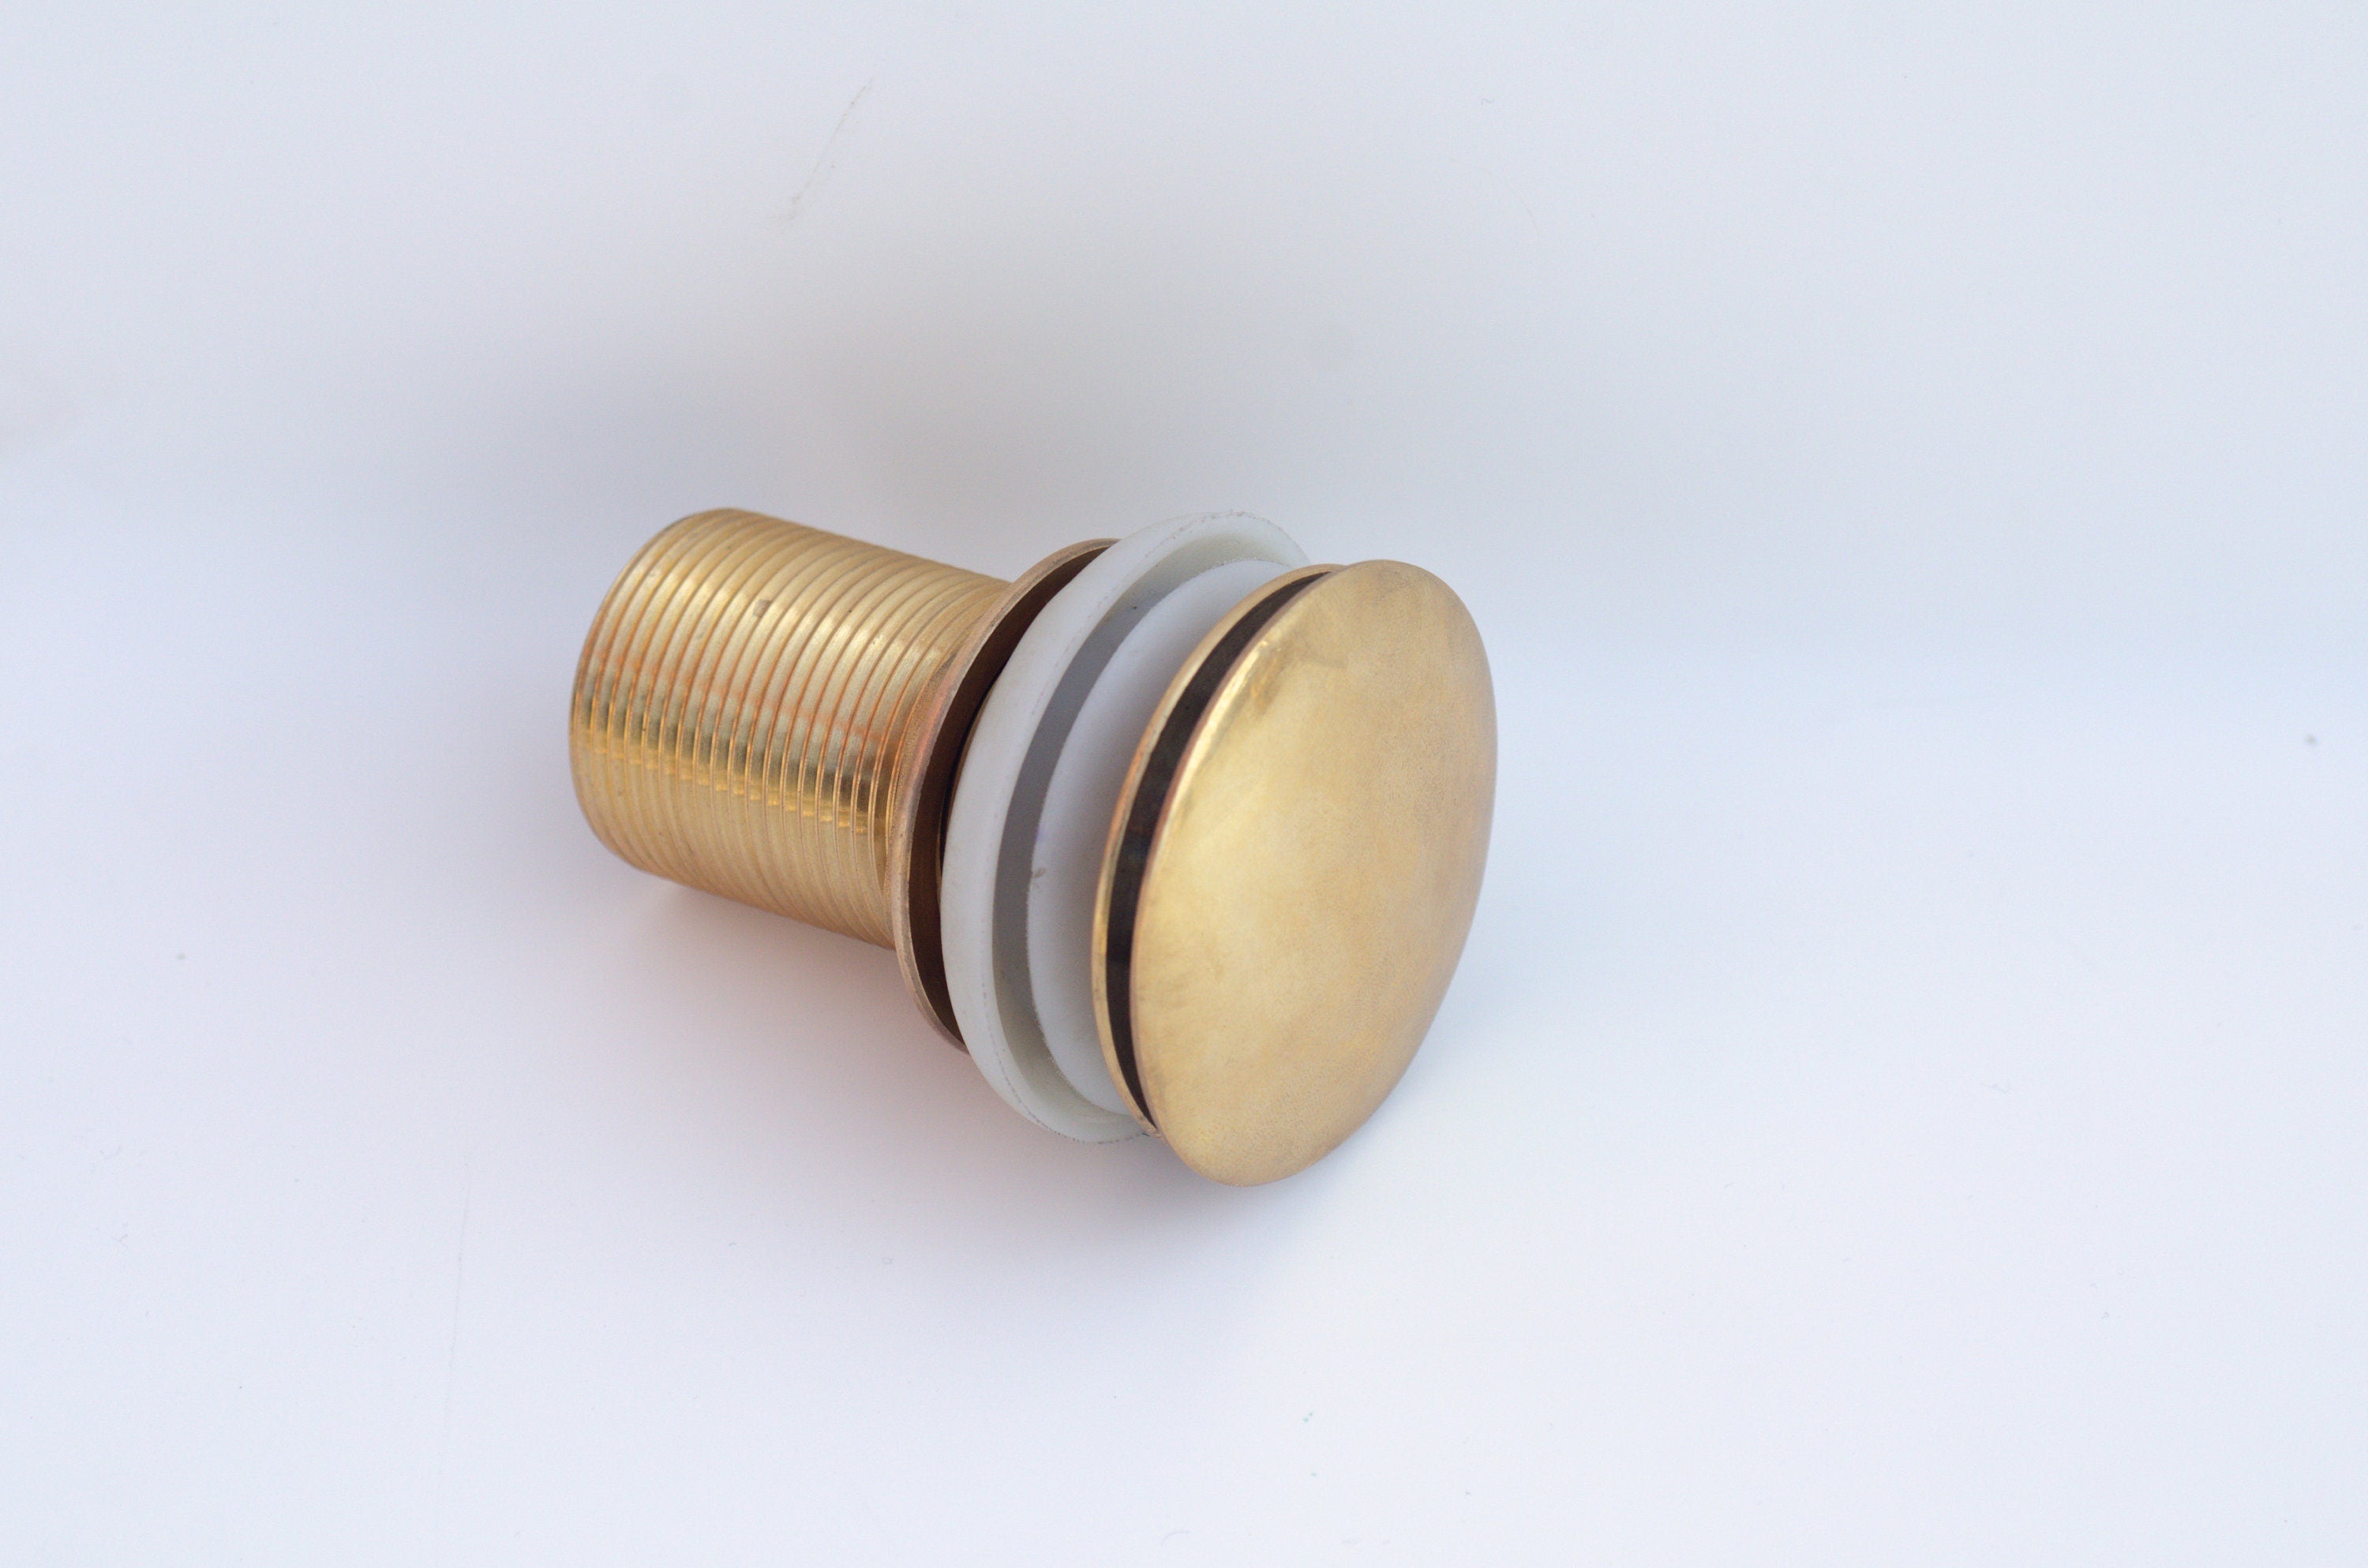 Solid Brass water trap sink stopper with brass push up button Zayian